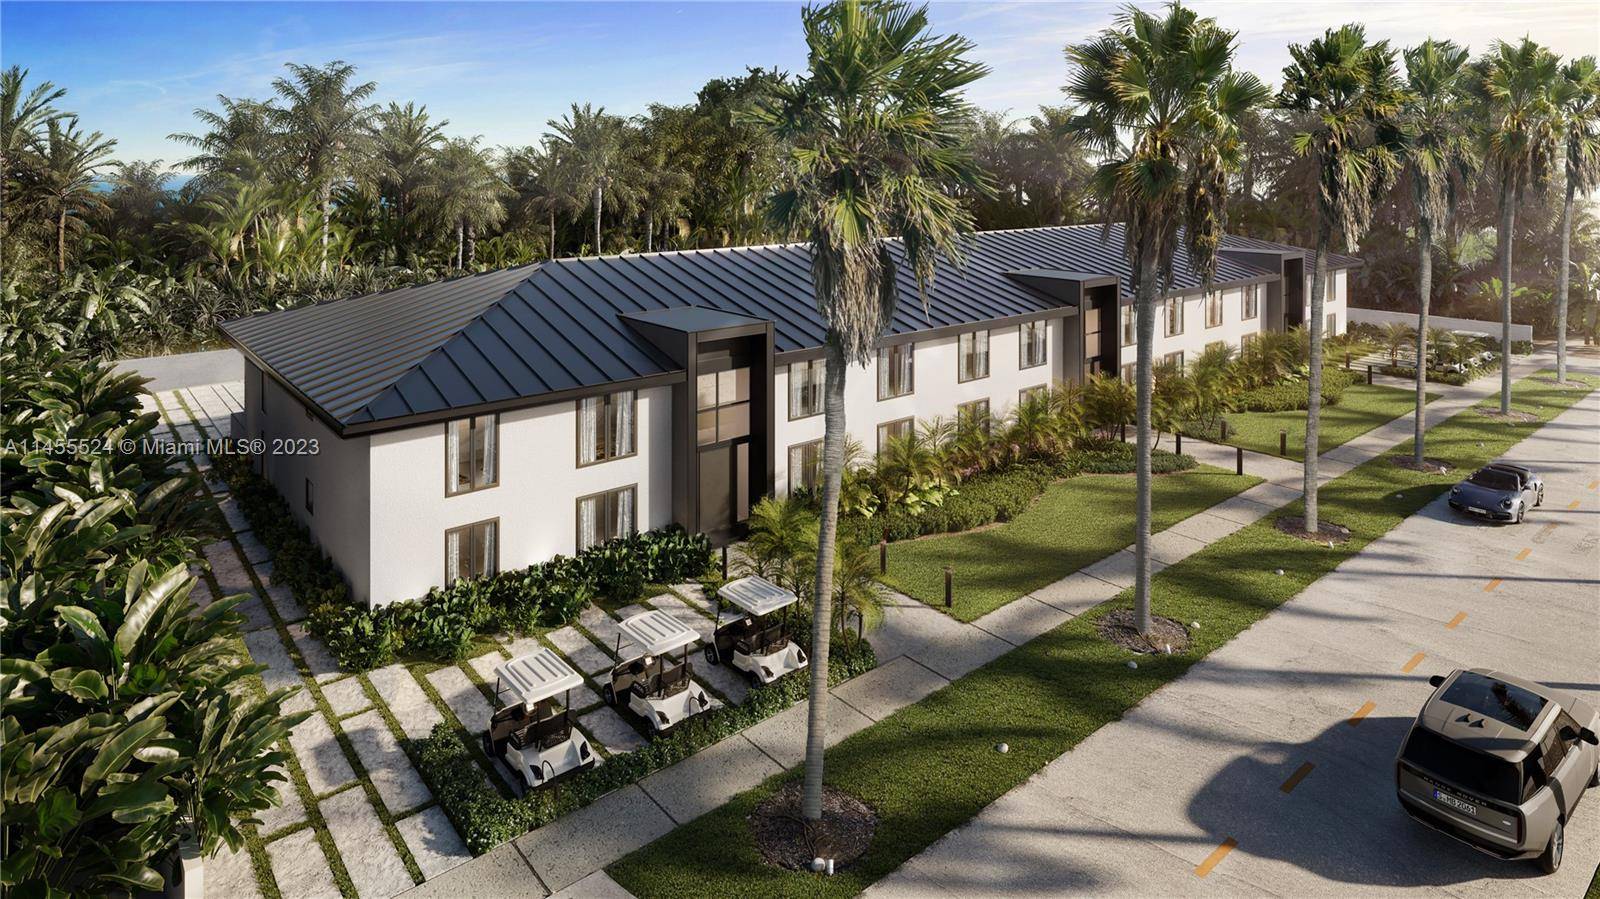 KEY CASSA is a truly unique development that embodies luxury, sophistication, and modern living.